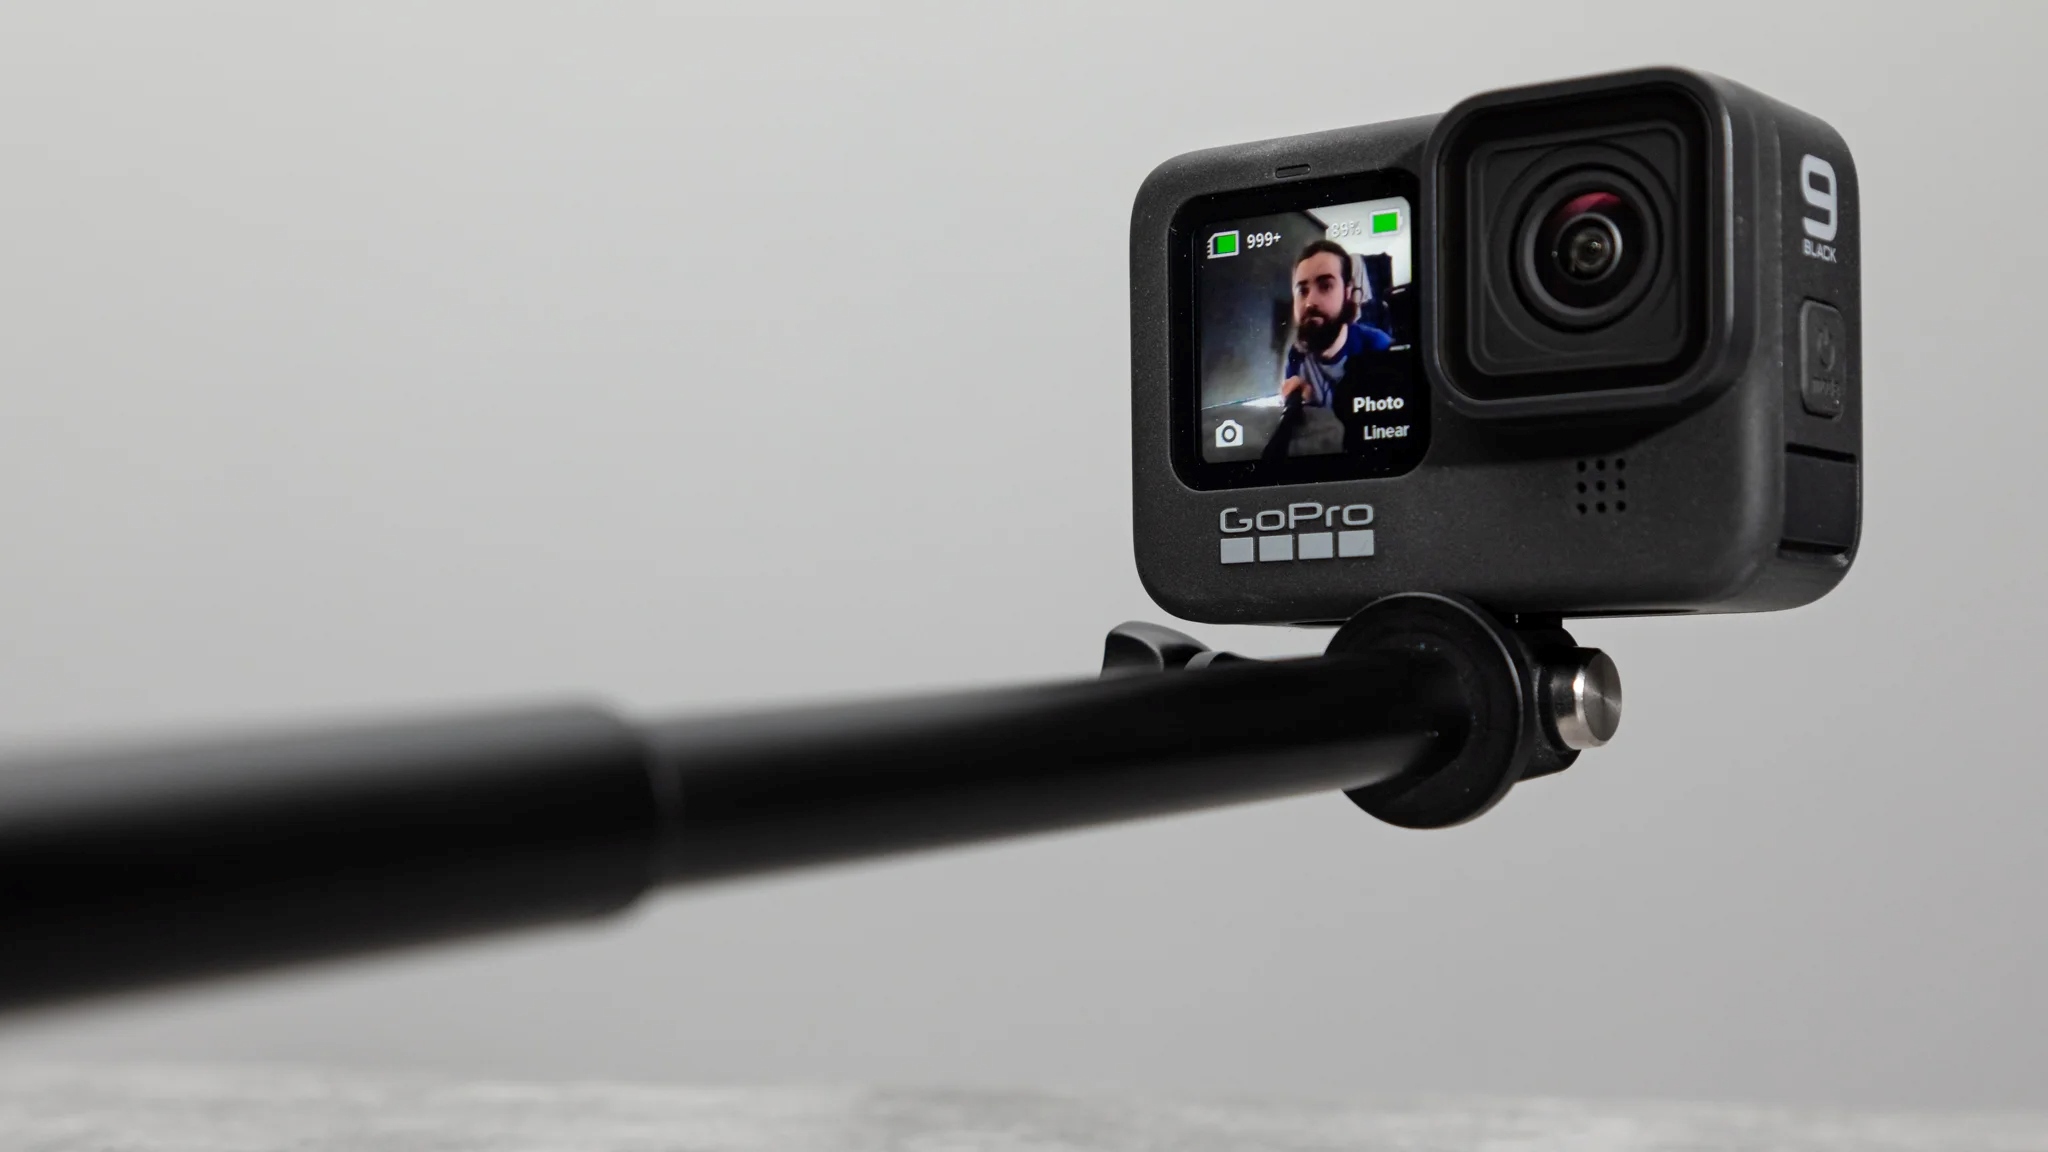 mounting-your-gopro-on-a-monopod-step-by-step